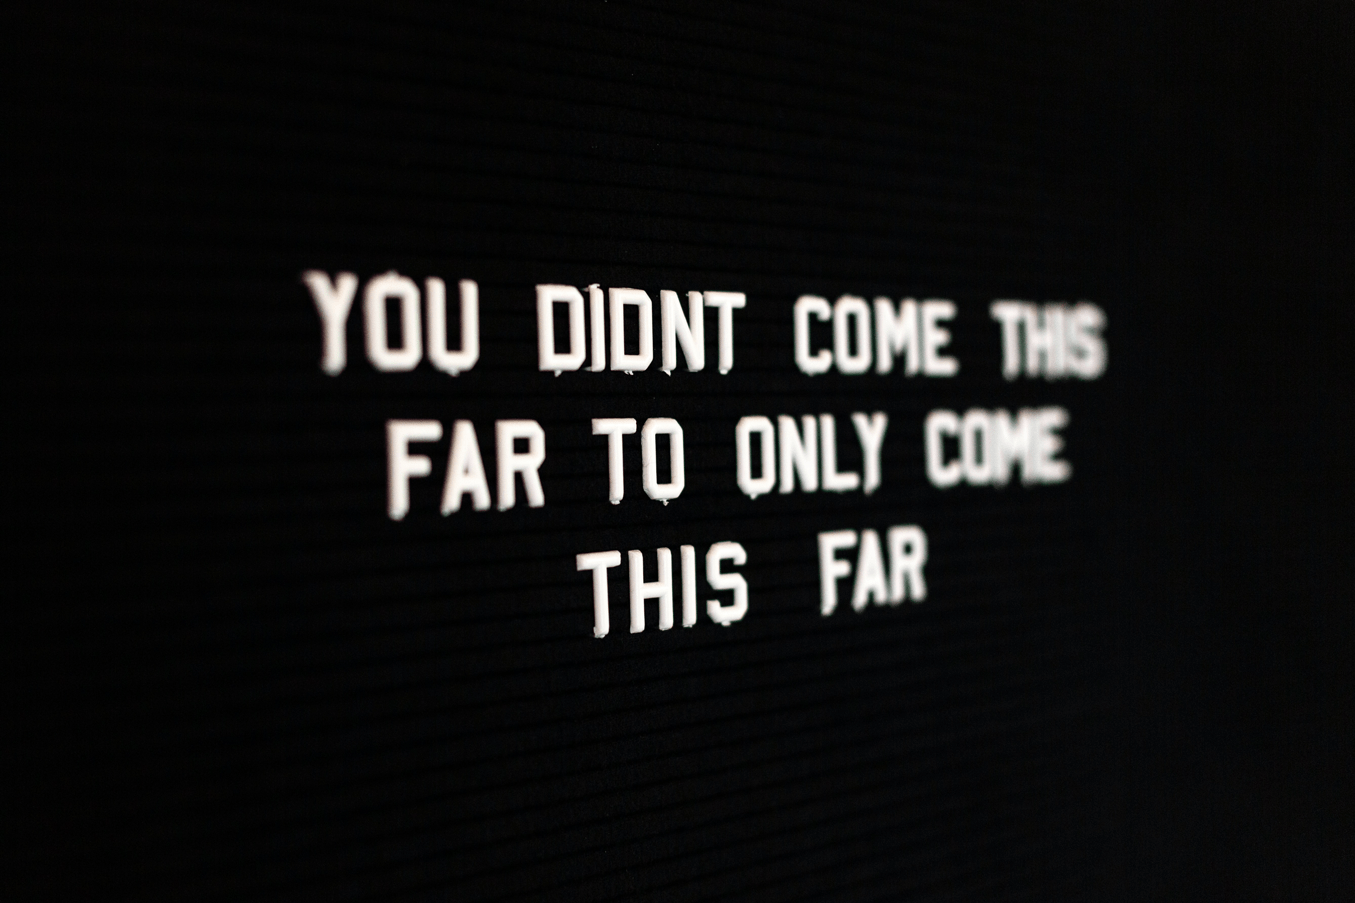 sign-that-says-you-didn't-come-this-far-to-only-come-this-far